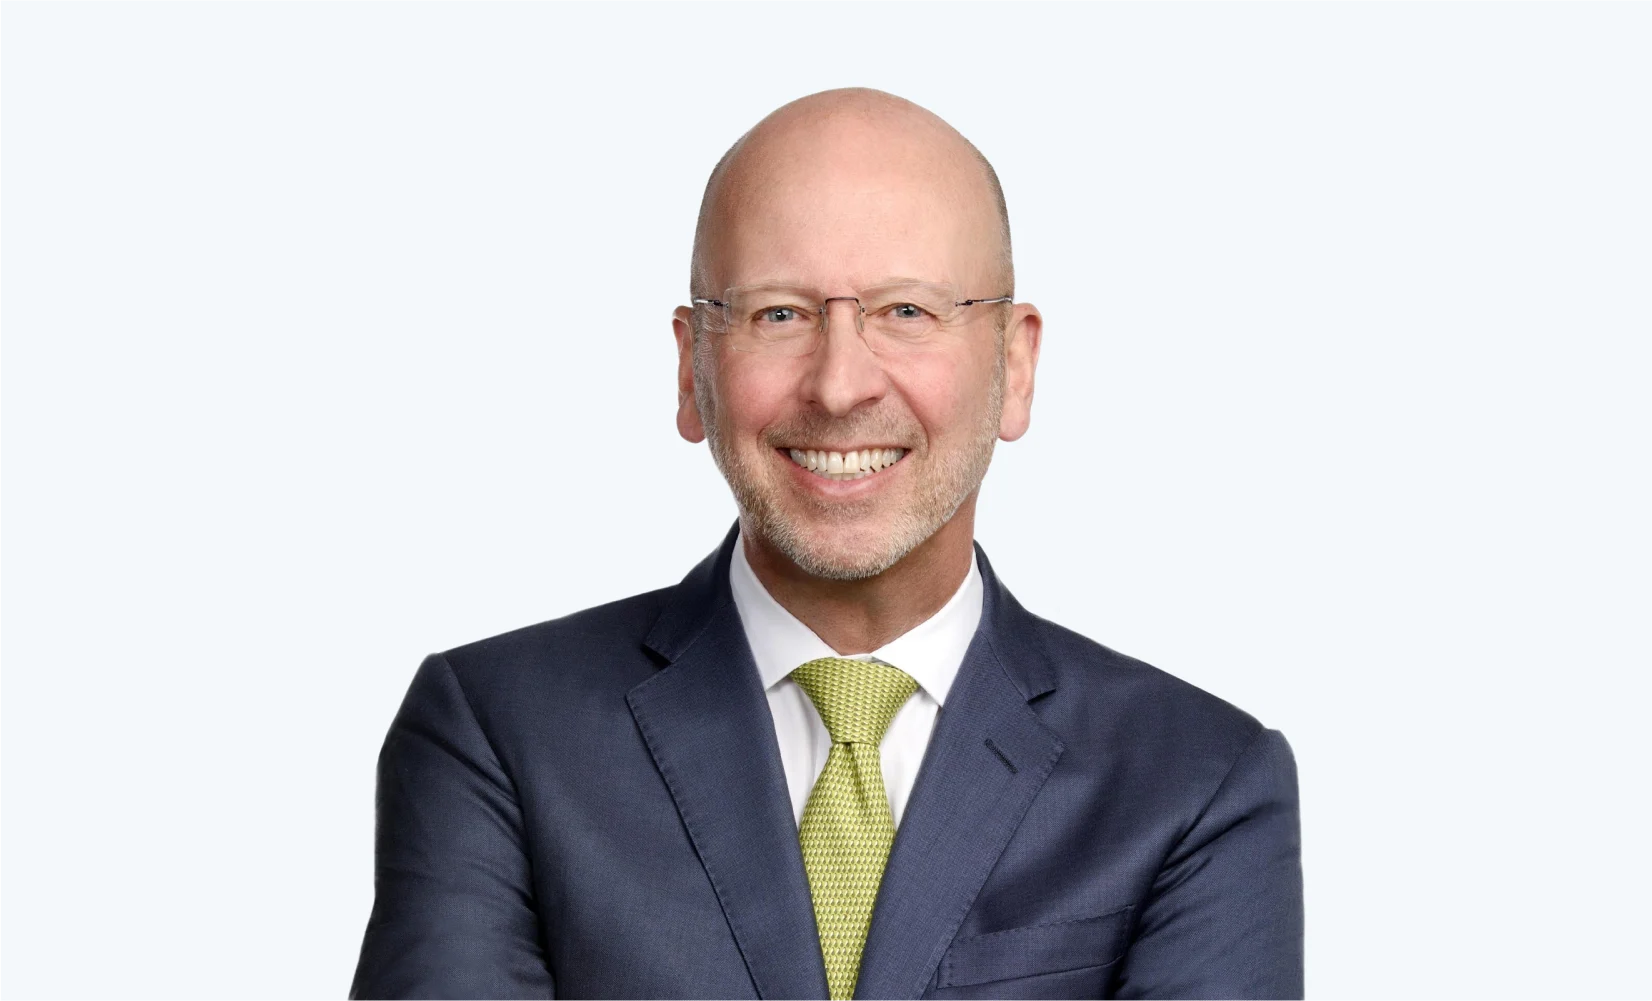 Victor Dodig, member of the Board of Directors of TELUS Corporation and member of the Pension Committee